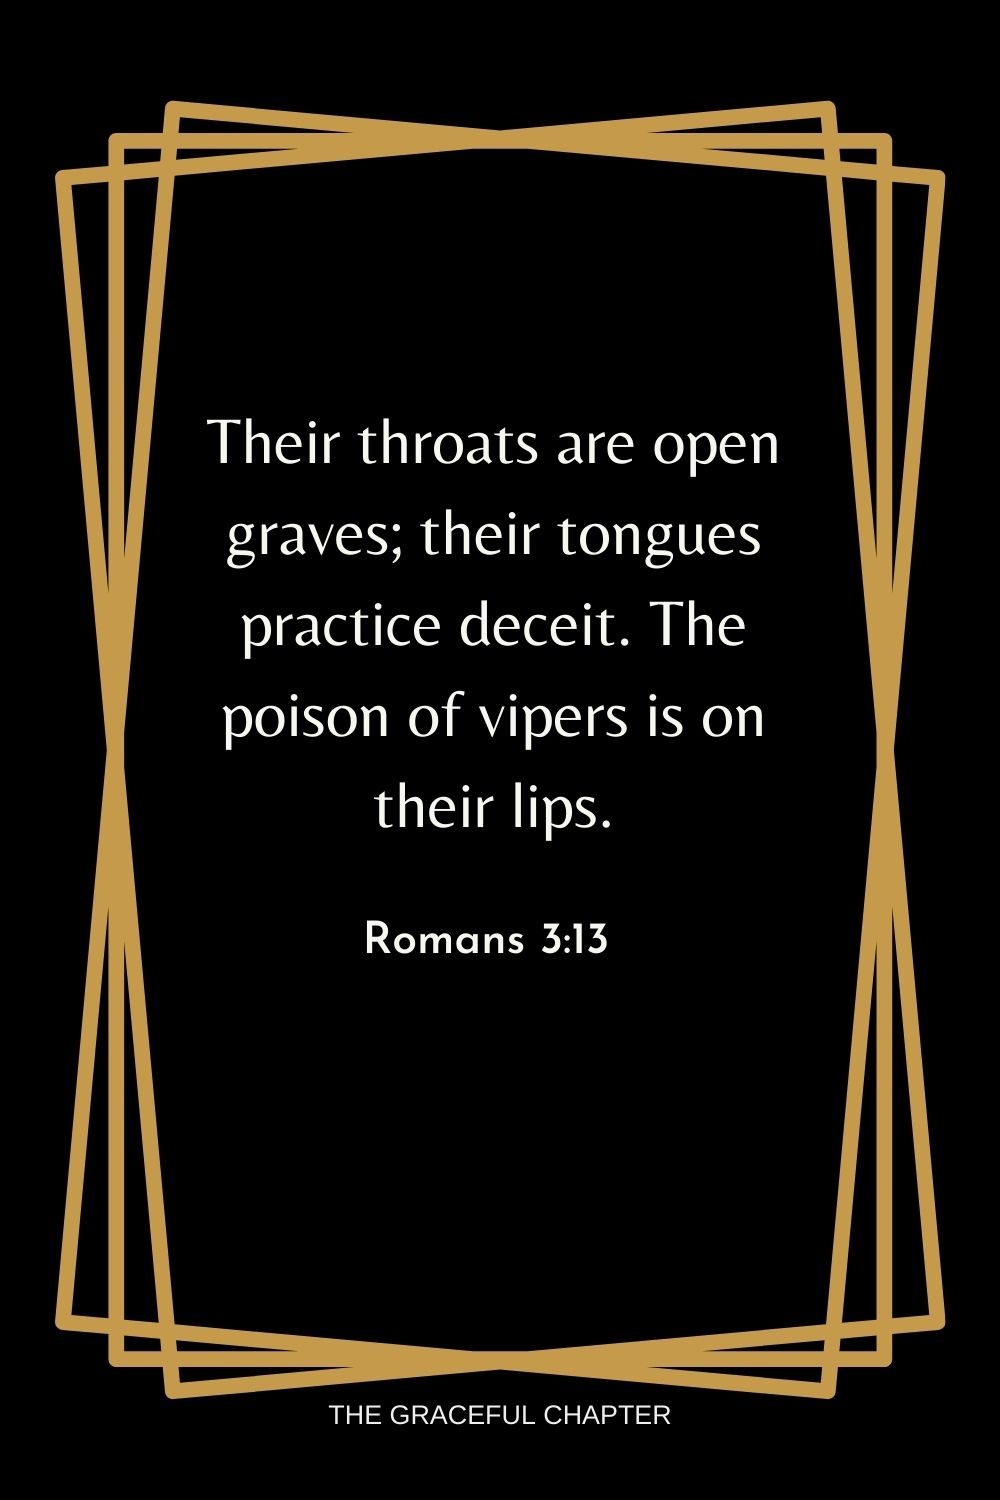 Their throats are open graves; their tongues practice deceit. The poison of vipers is on their lips. Romans 3:13